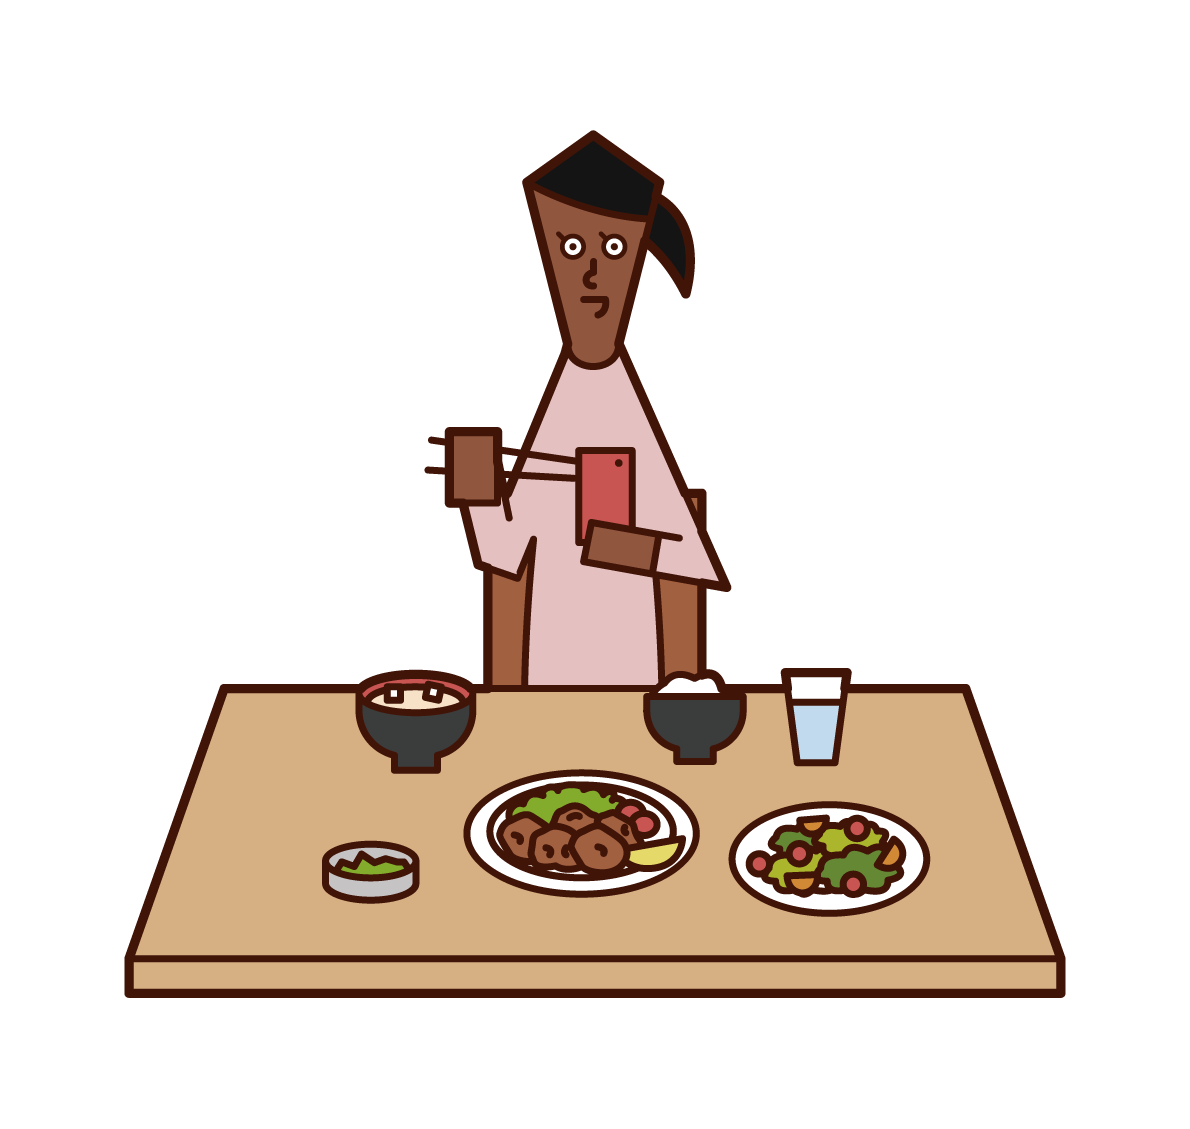 Illustrations of people (women) who use smartphones during meals